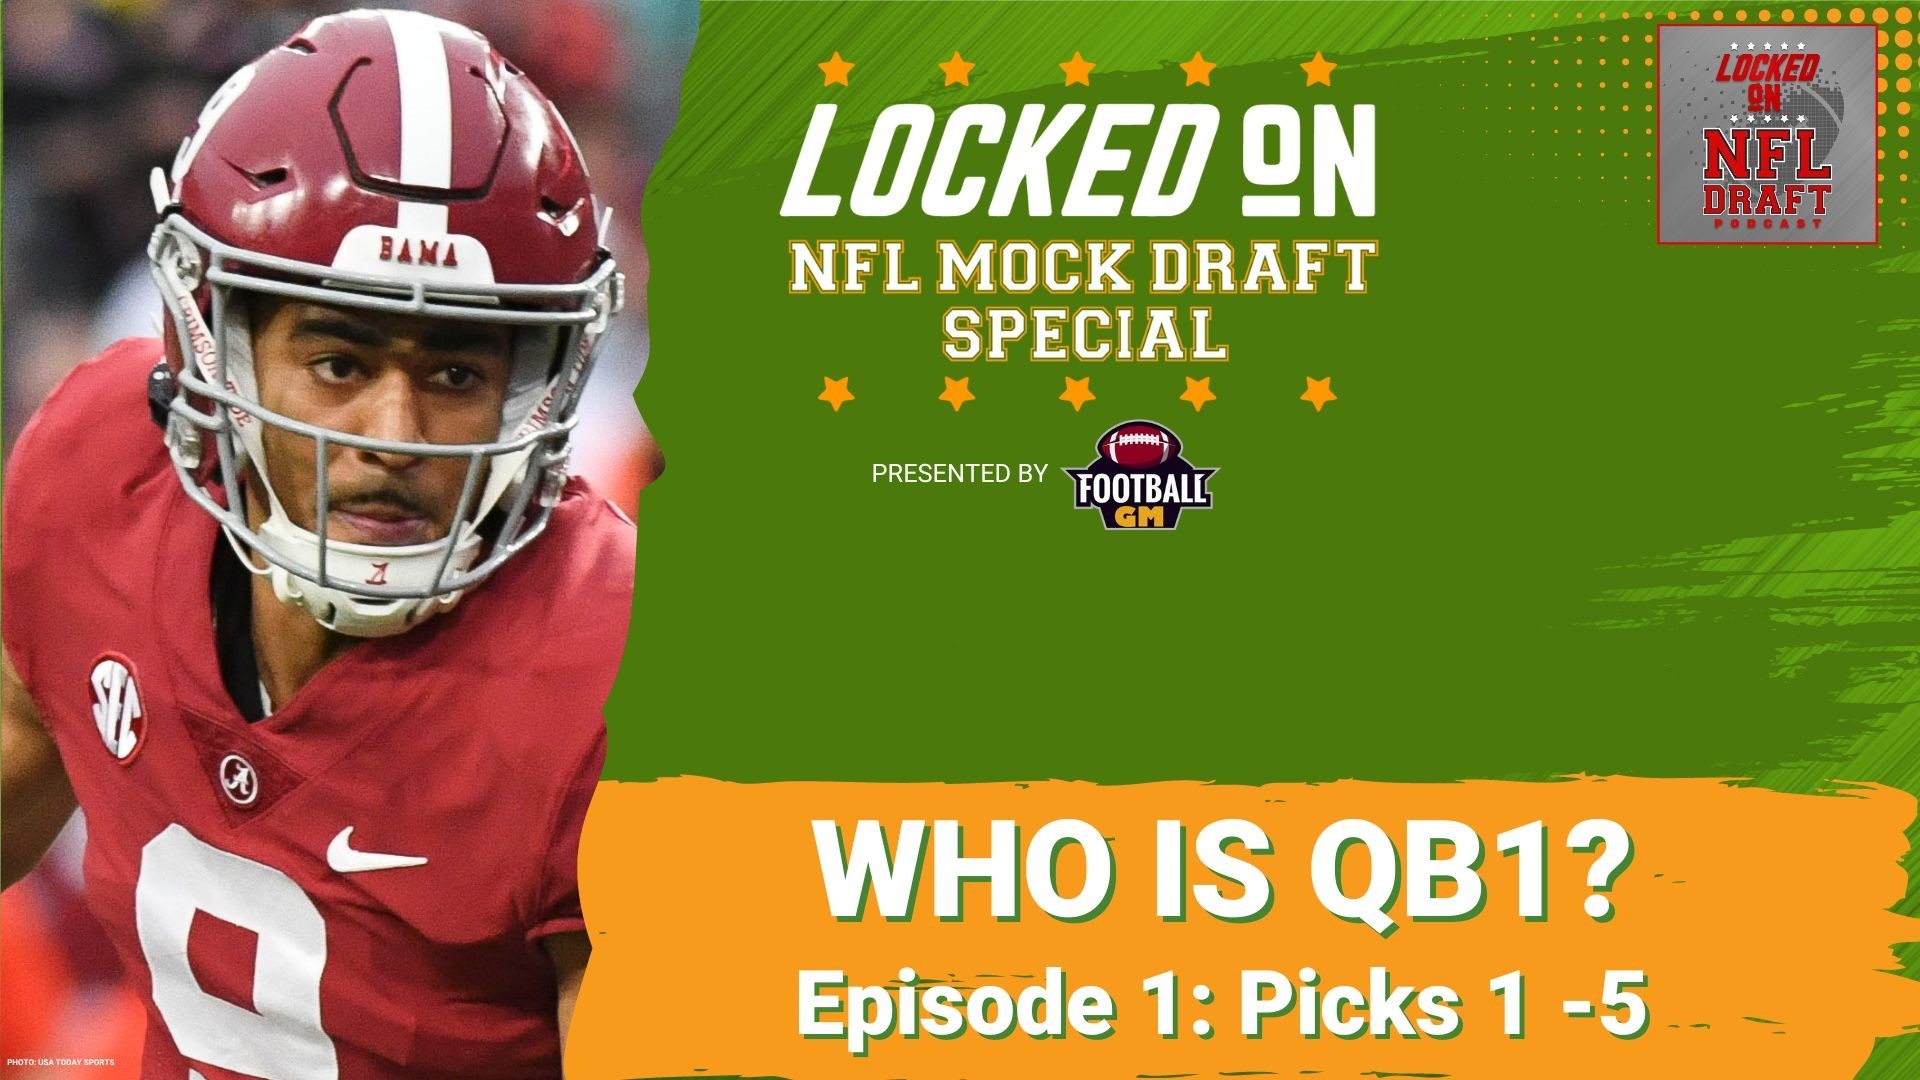 The Locked On Team shares analysis and inside information on the 2023 NFL Draft. A look at their mock draft and picks for the first five spots.